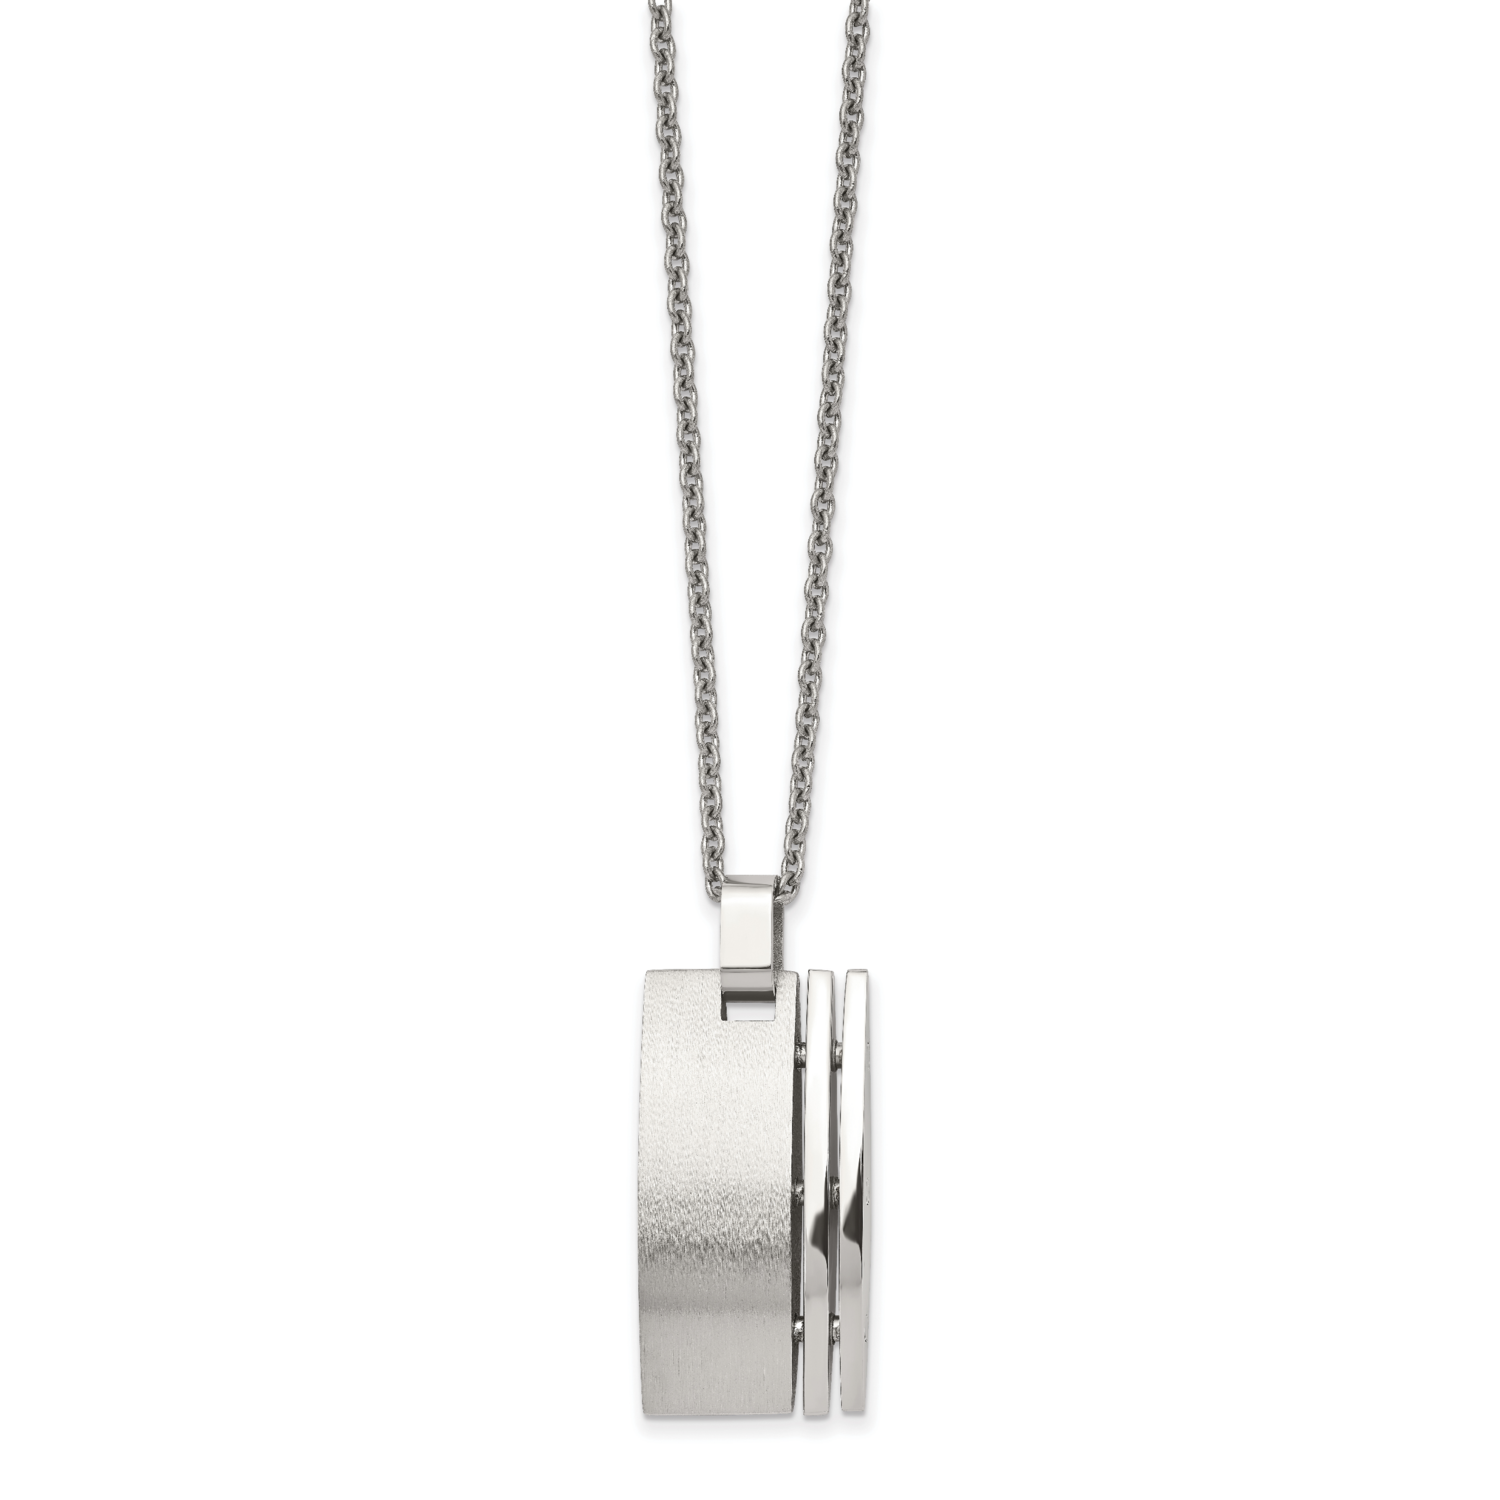 Pendant 22 Inch Necklace Stainless Steel Brushed SRN435-22